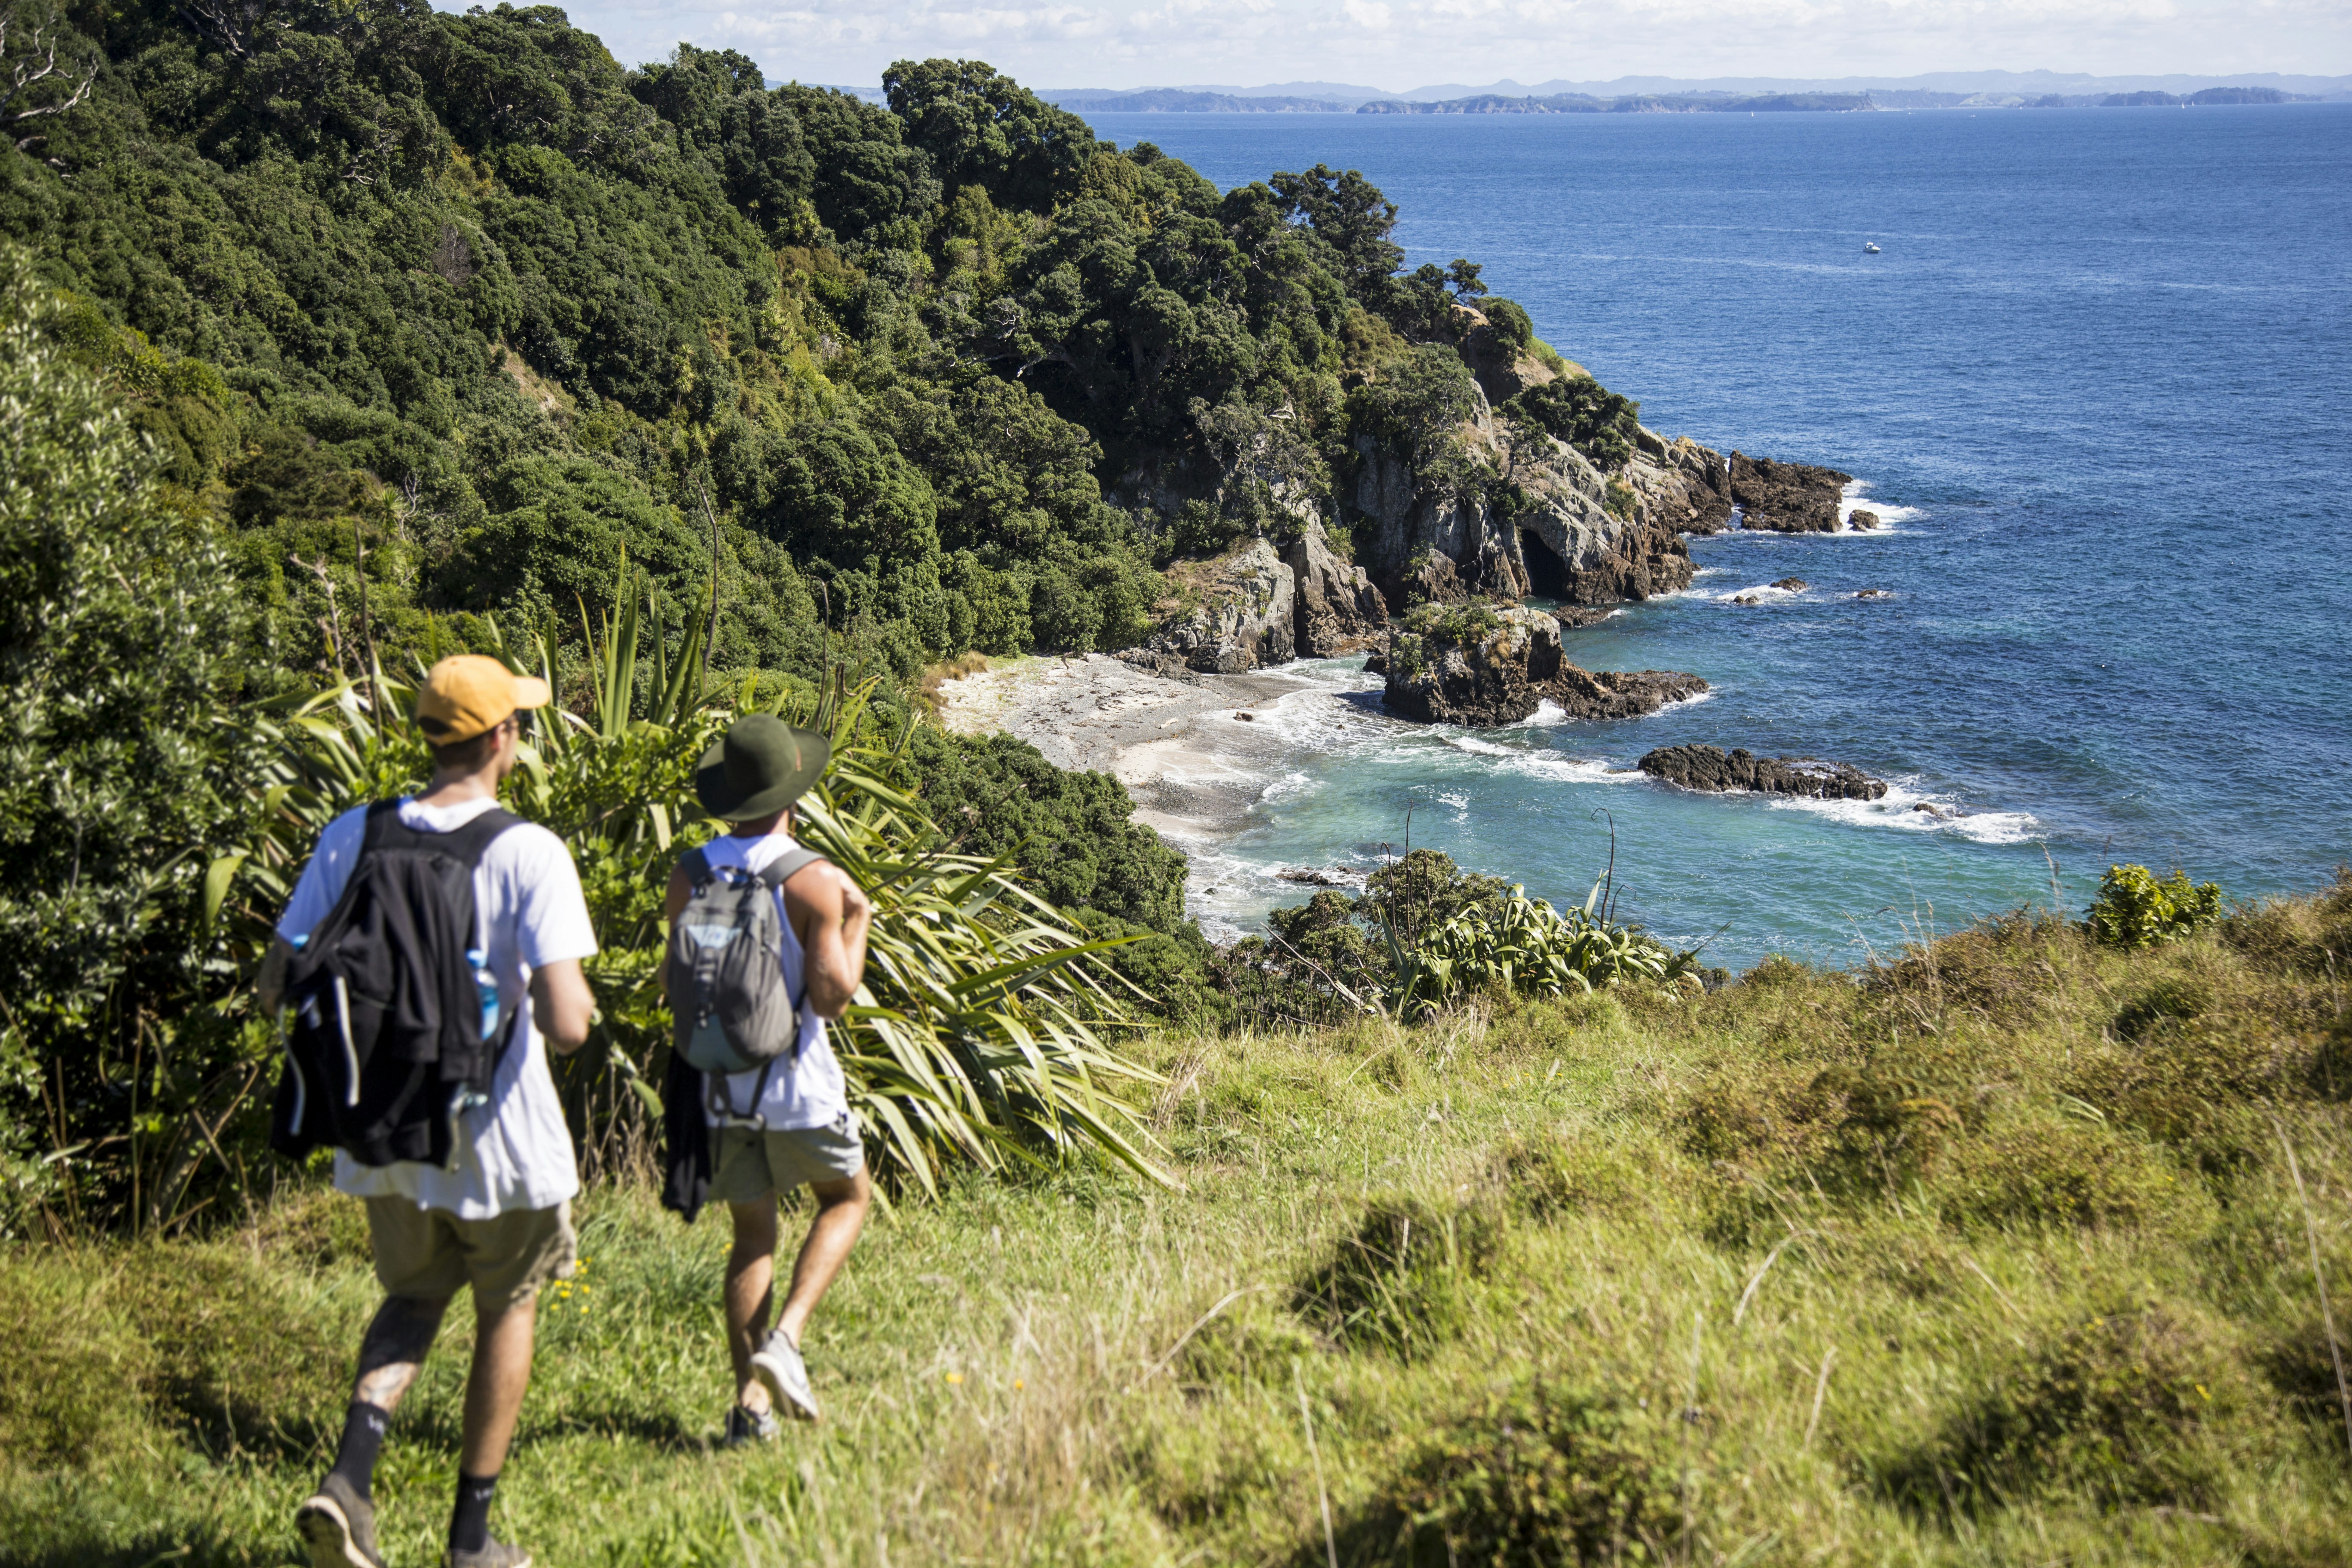 Two hikers wearing backpacks stride down a grassy path towards a sandy cove hidden by tall rocks on each side